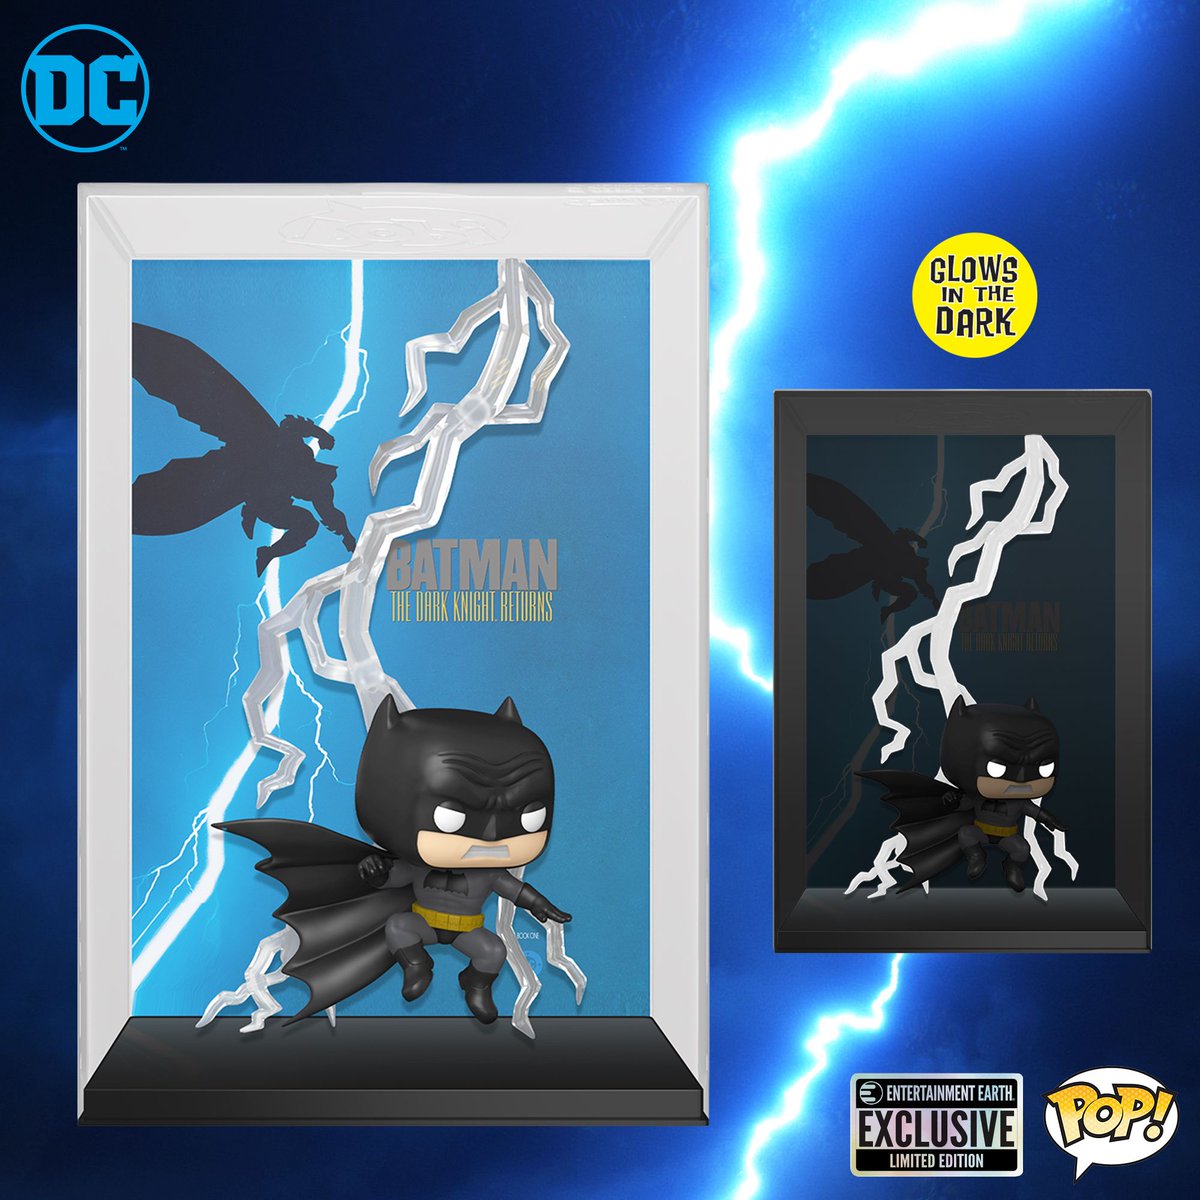 We're known for our glow, and this comic cover is no exception! The Batman: The Dark Knight Returns Comic Cover Exclusive pays homage to the iconic Frank Miller 1986 comic series. I. AM. BATMAN! 💥 buff.ly/3UyO6j5